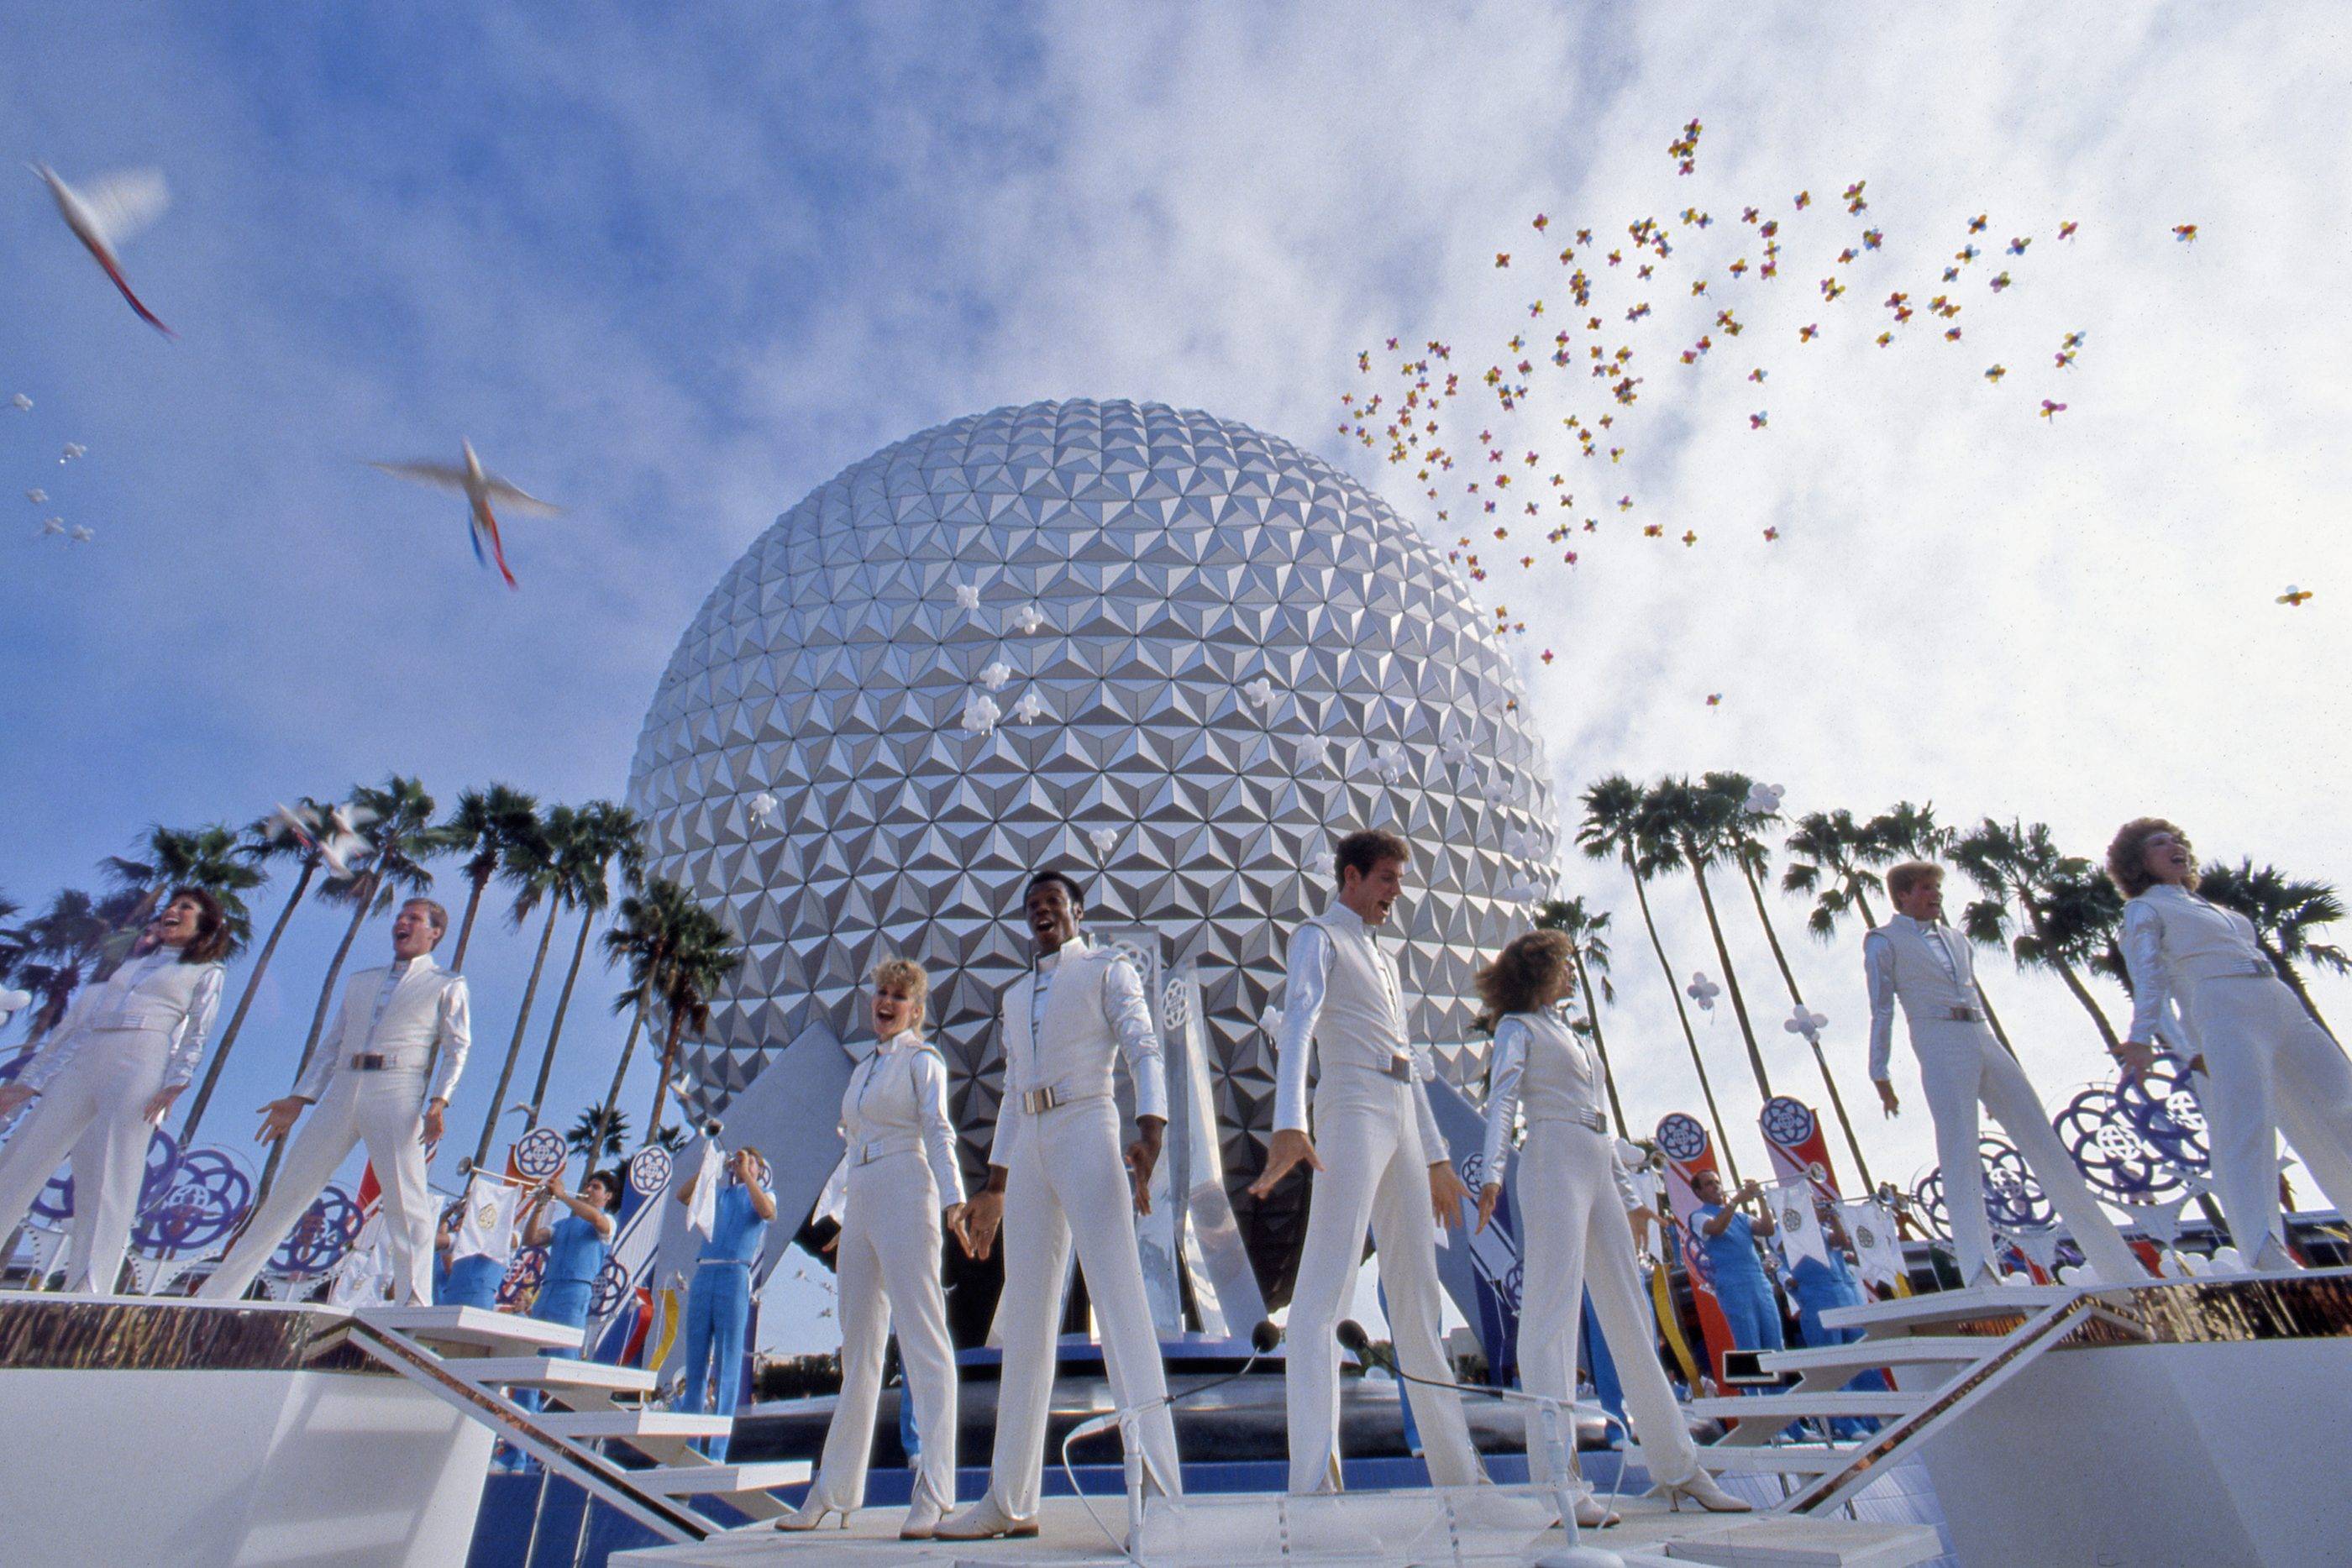 On Oct. 1, 1982, EPCOT officially opened at Walt Disney World Resort